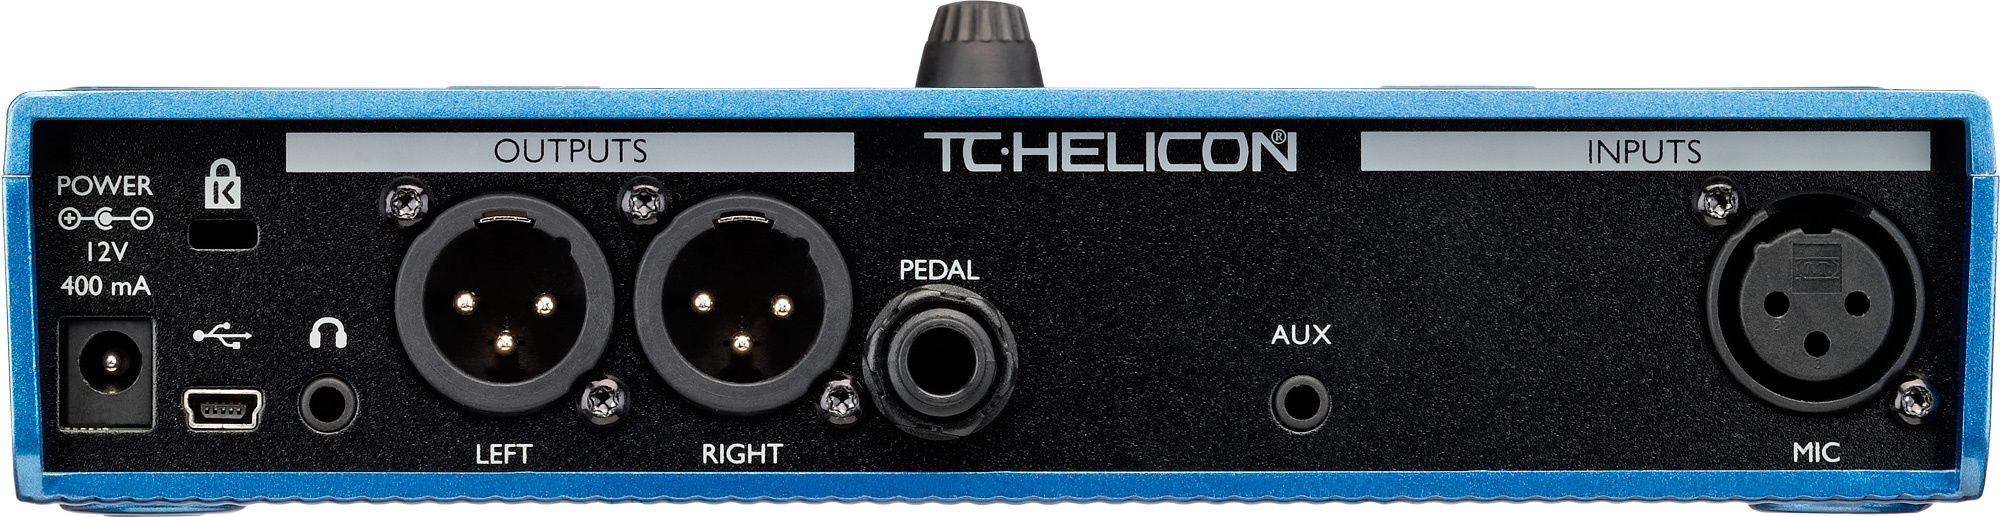 Procesor voce tc helicon voicelive play